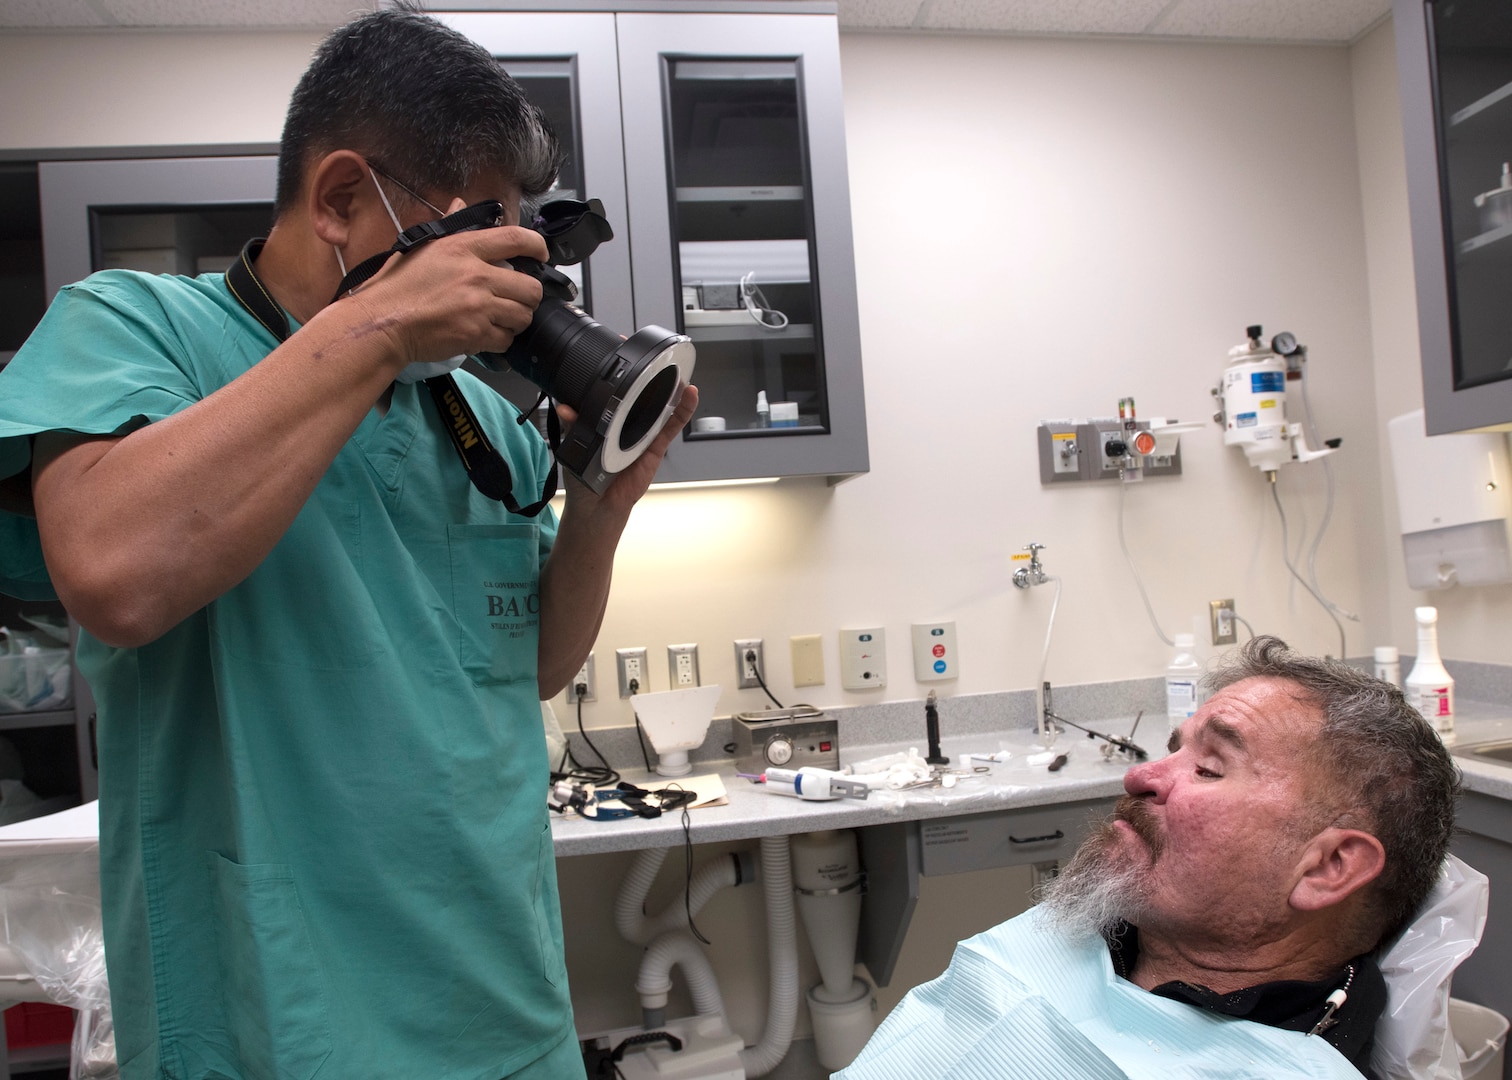 Lt. Col. (Dr.) Young J. Honnlee, 59th Medical Wing maxillofacial prosthodontics fellow, takes a photo of a patient at San Antonio Military Medical Center, Joint Base San Antonio-Fort Sam Houston, Texas. Honnlee documents the healing progress of the patient. (U.S. Air Force photo by Staff Sgt. Kevin Iinuma)